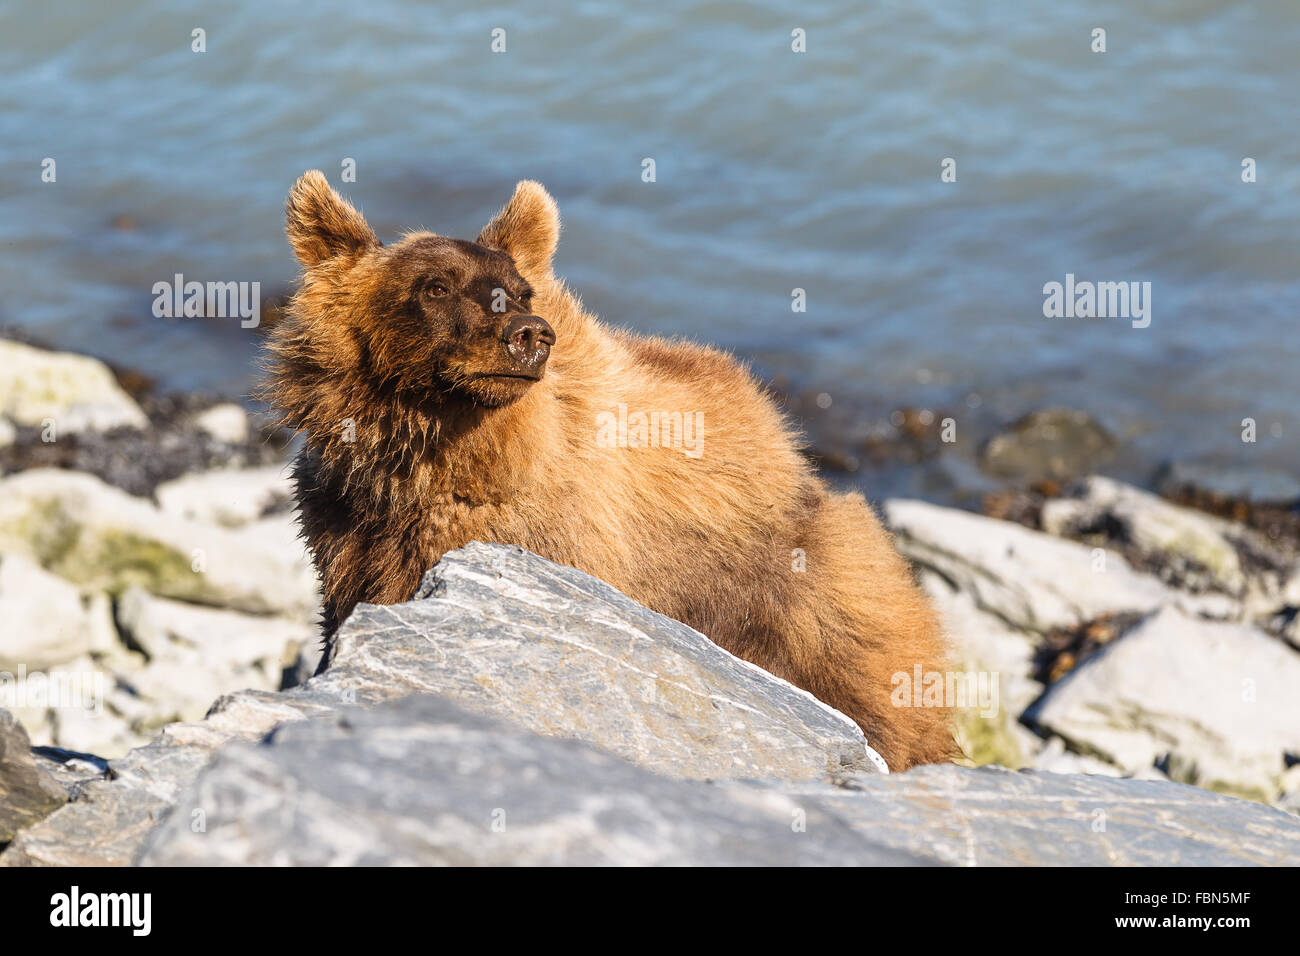 Grizzly bear cub by the sea by Dayville Road, Valdez, Alaska, United States of America. Stock Photo